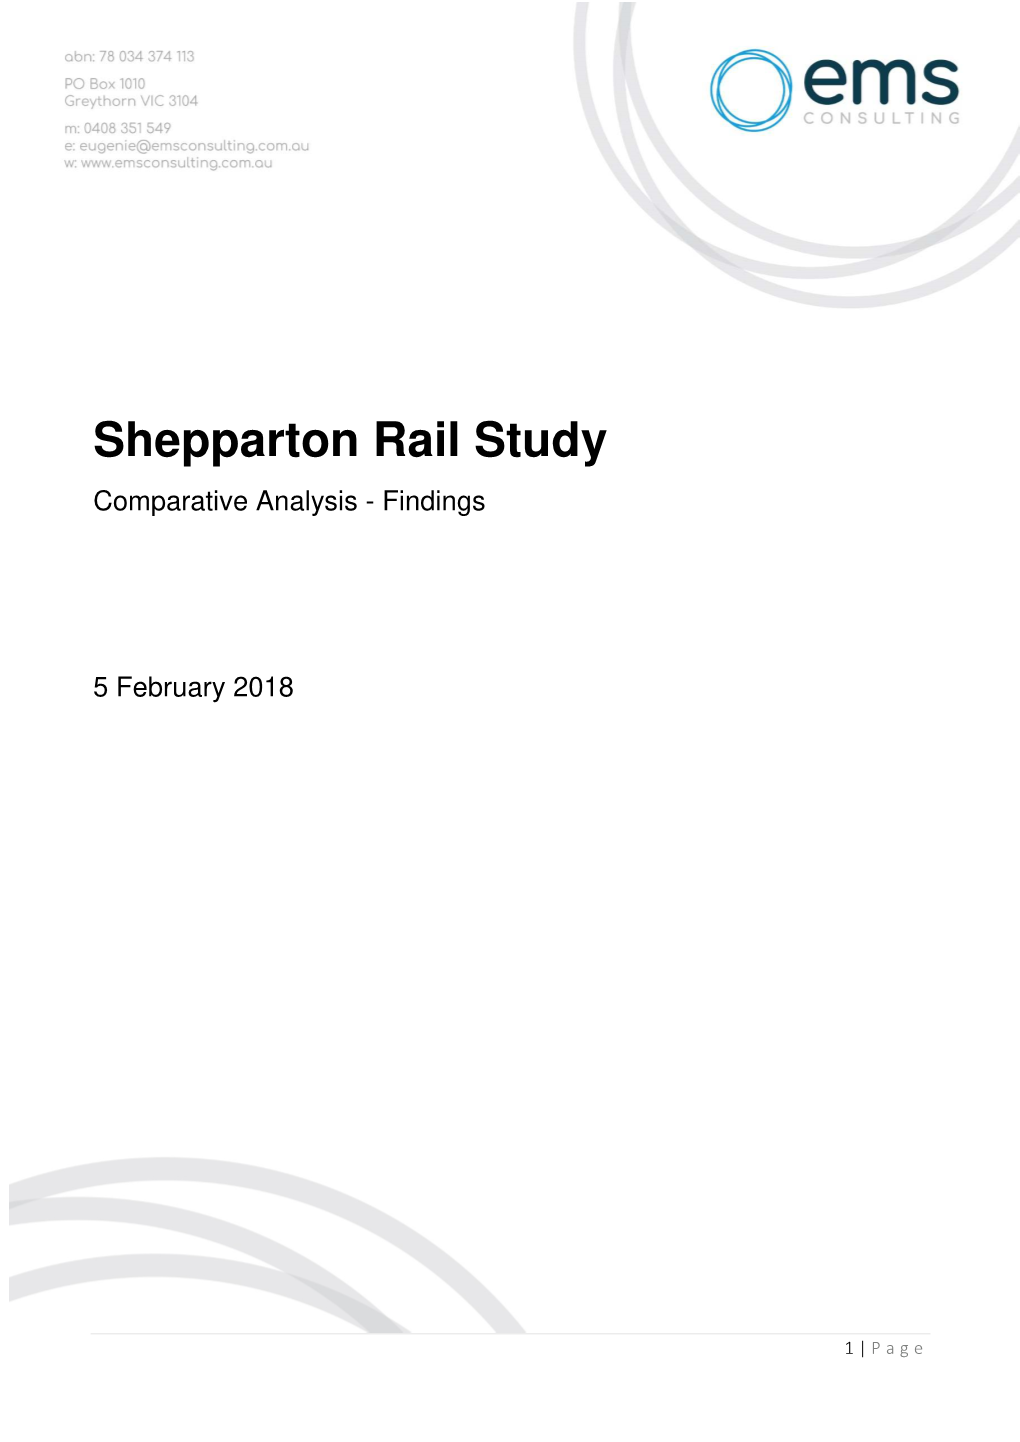 Shepparton Rail Study Comparative Analysis - Findings